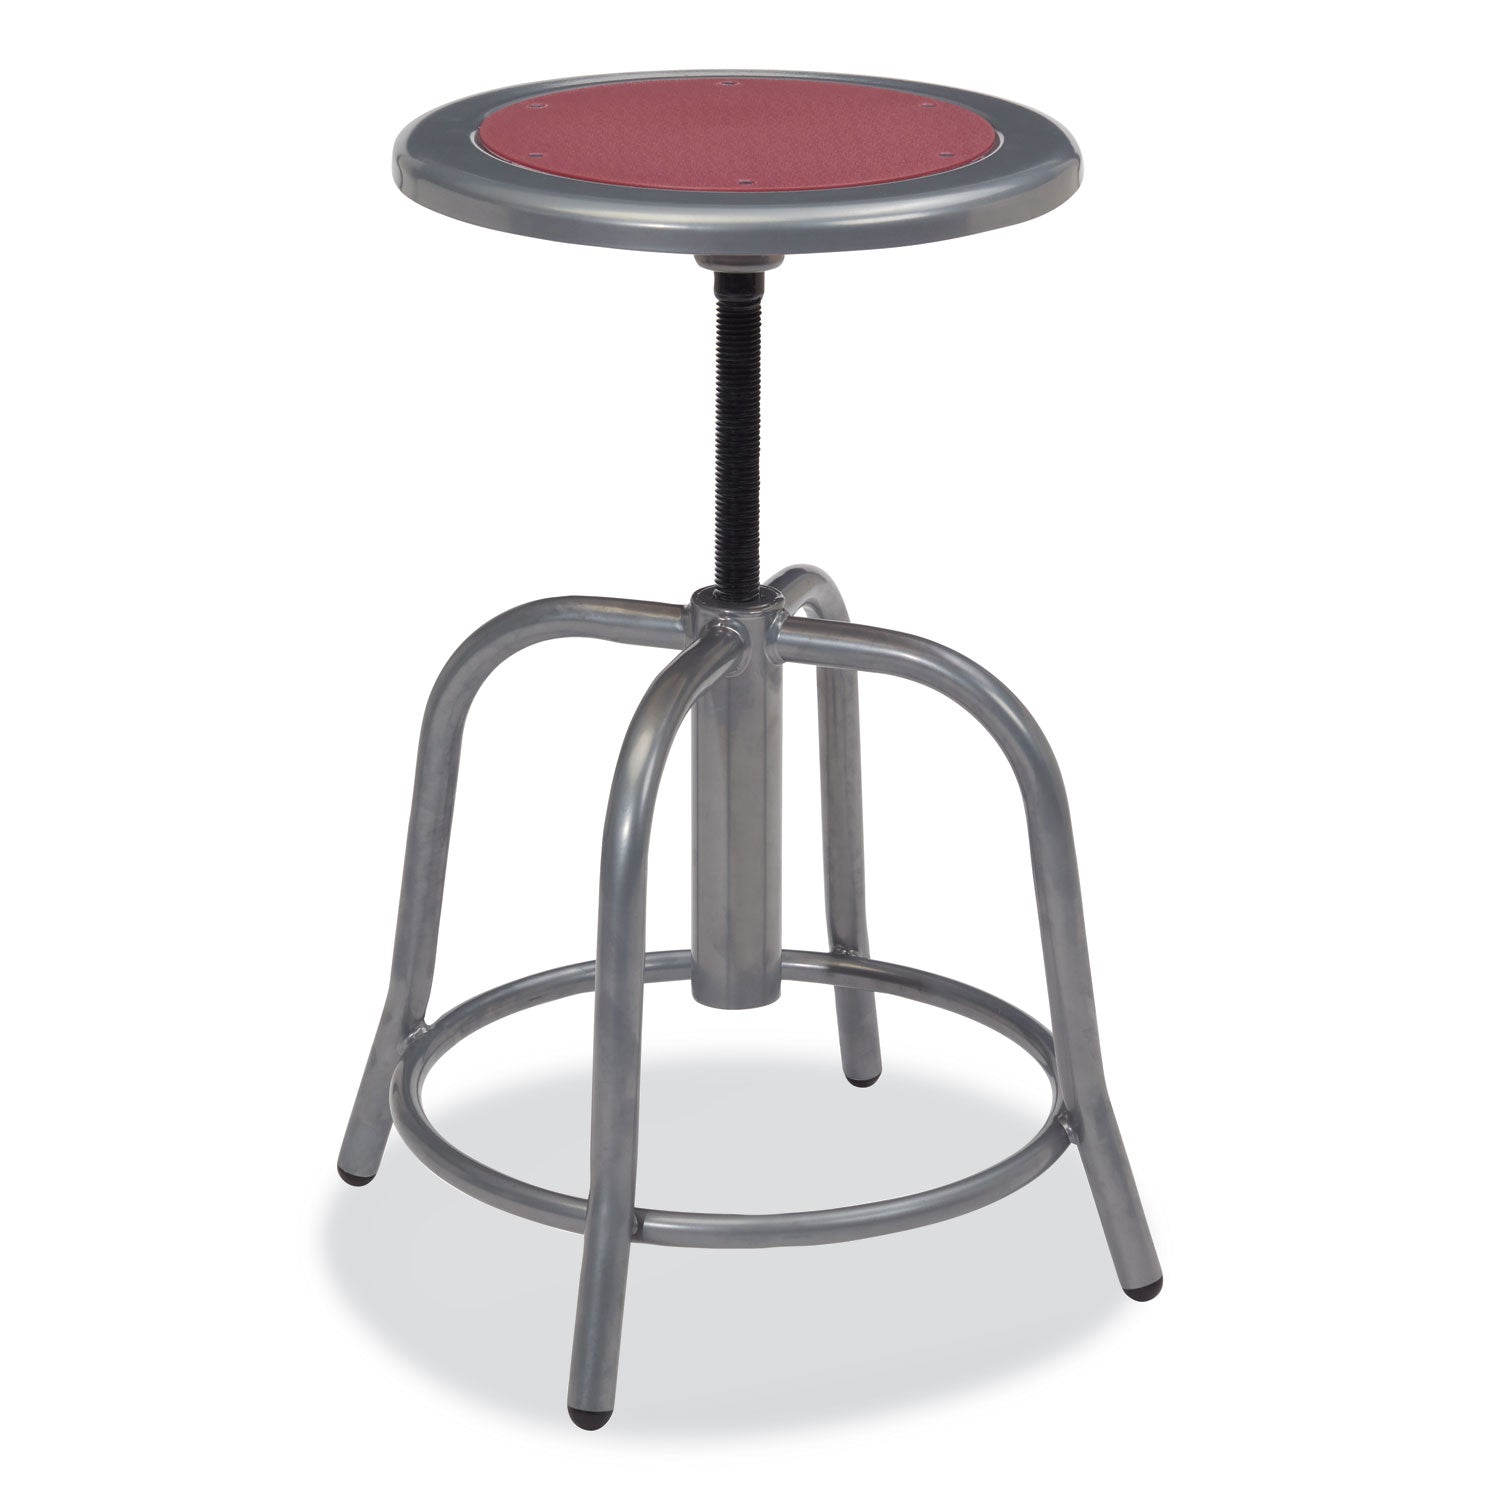 6800-series-height-adj-metal-seat-swivel-stool-supports-300lb-18-24-seat-htburgundy-seat-gray-baseships-in-1-3-bus-days_nps681802 - 2